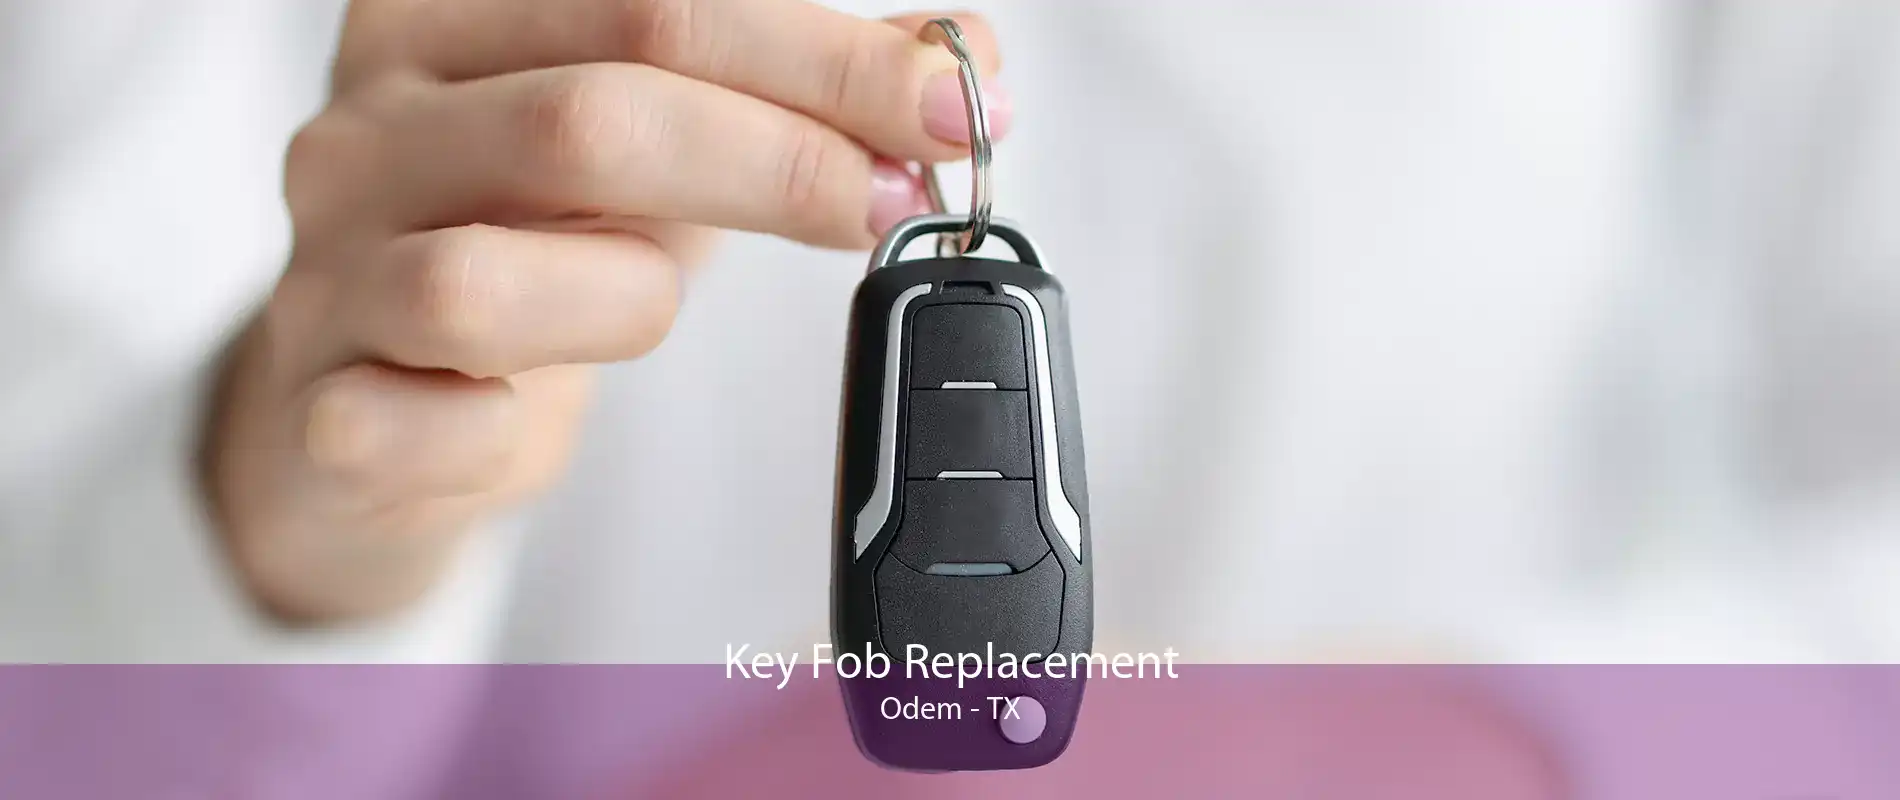 Key Fob Replacement Odem - TX